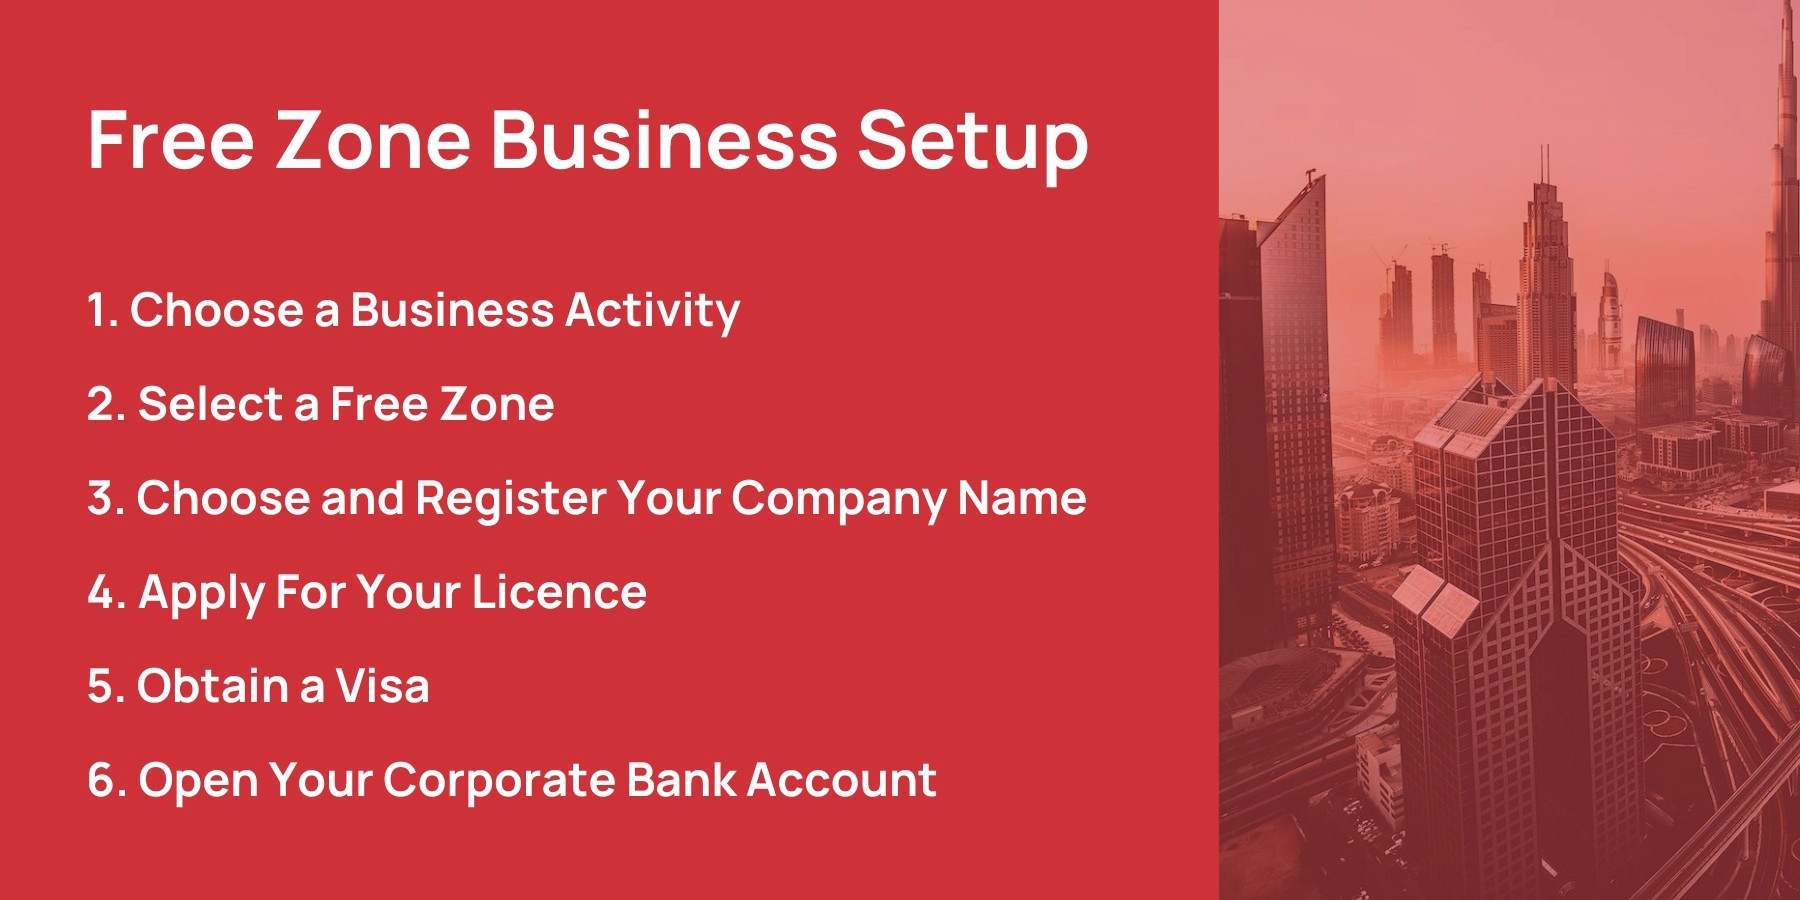 An infographic which details the steps involved in business setup in a Dubai Free Zone.